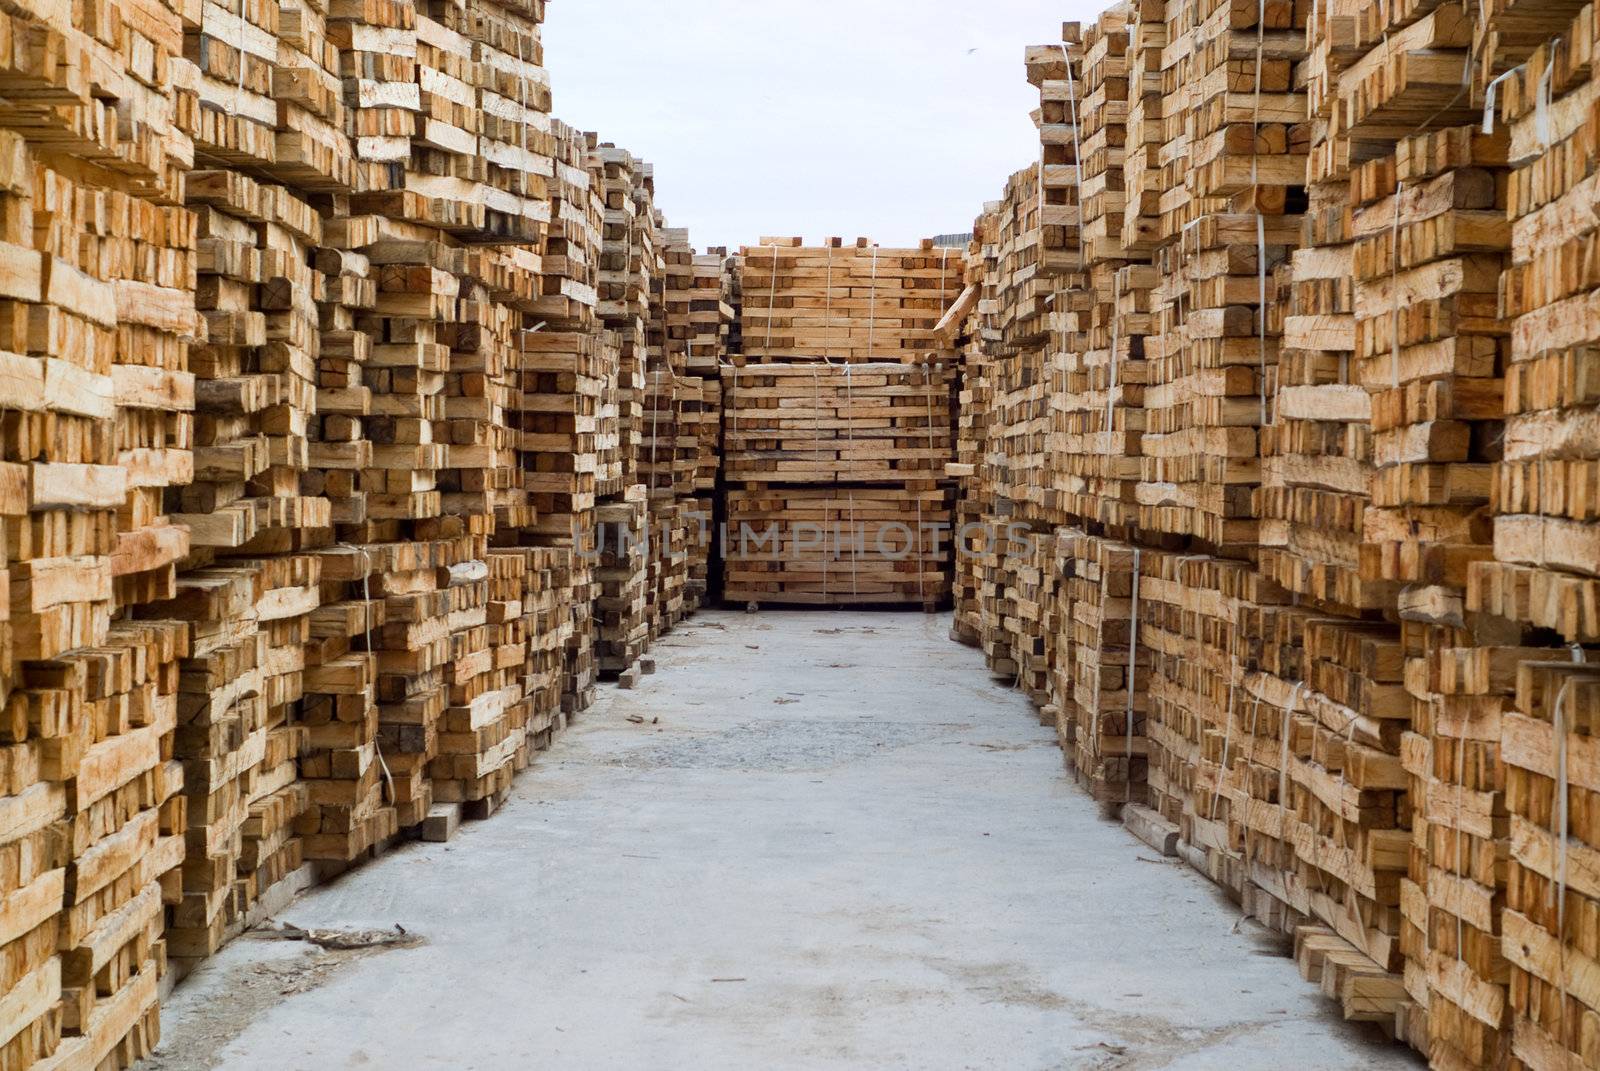 Stacked wood or timber in factory warehouse or storage area